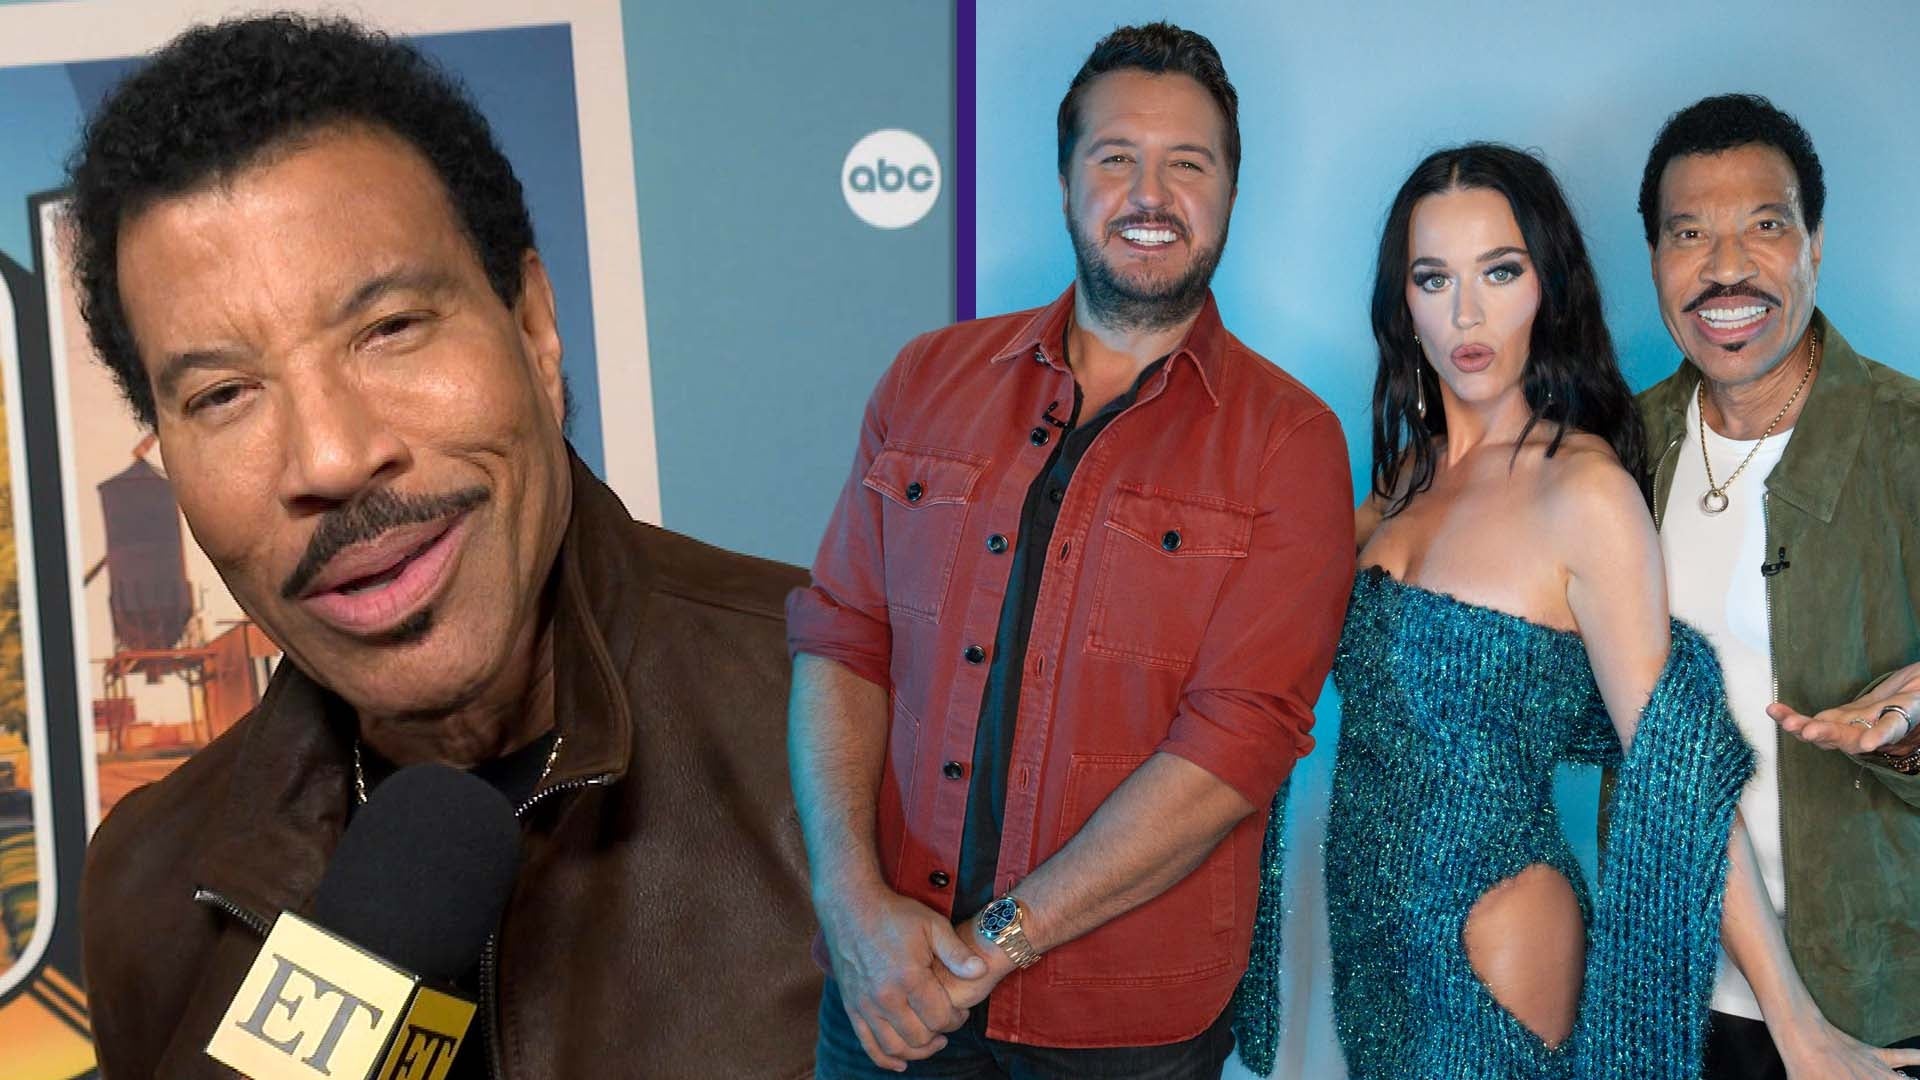 Lionel Richie Wants This 'American Idol' Winner to Replace Katy Perry (Exclusive)